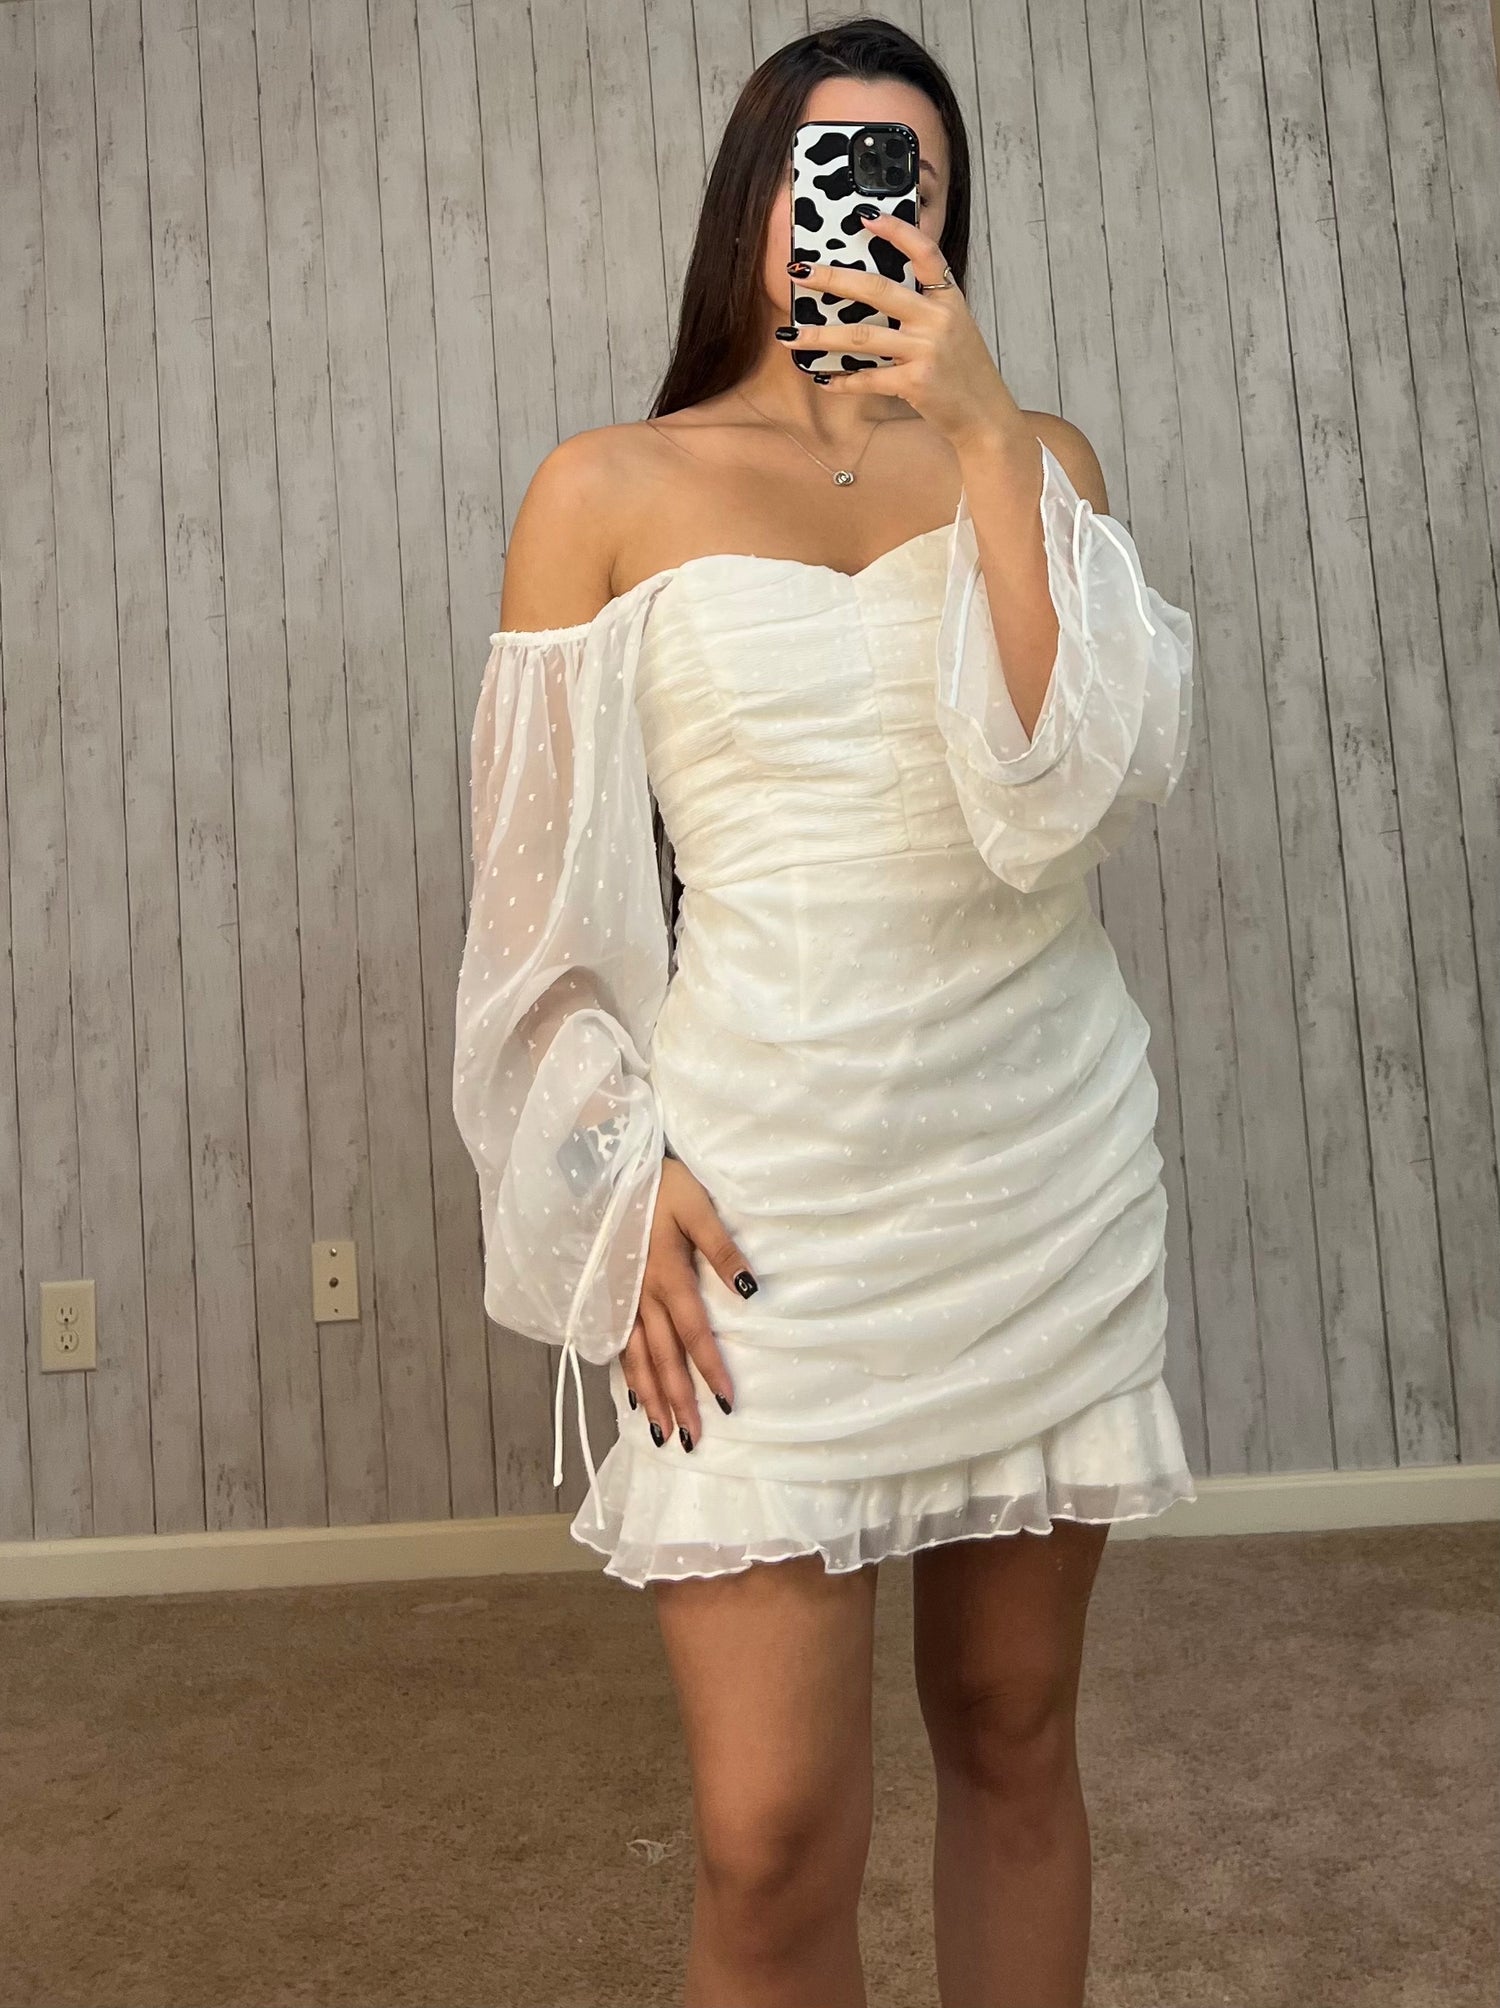 Bridal Shower Outfits